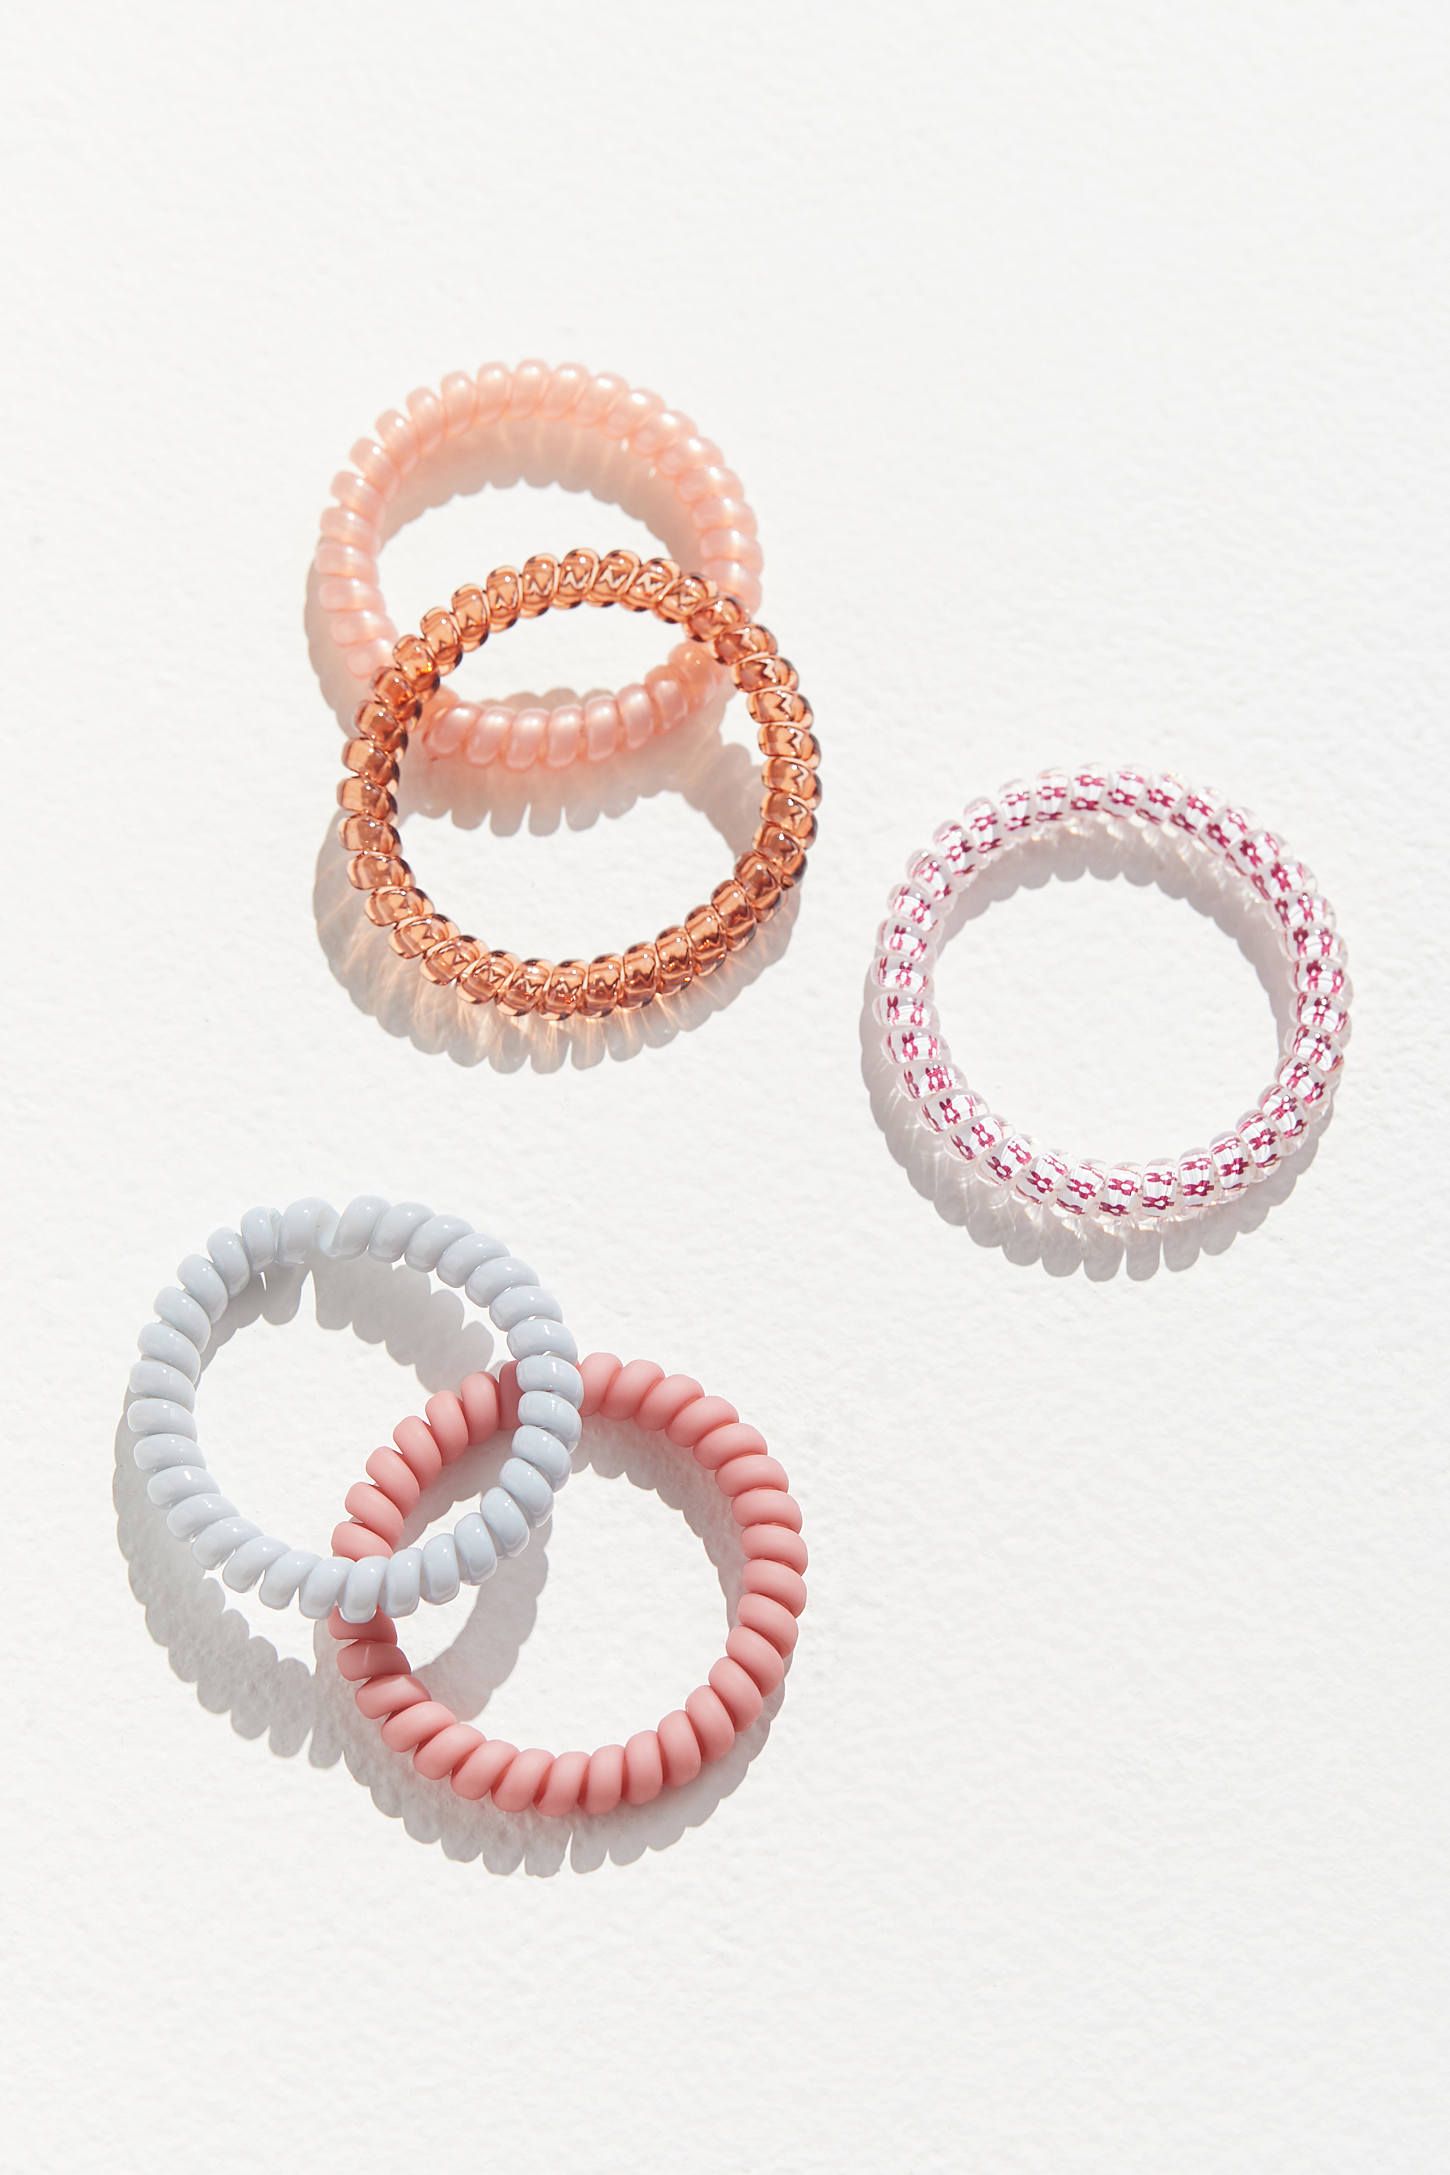 9 Best Spiral Hair Ties of 2022 - What Hair Ties Are Best for Your Hair